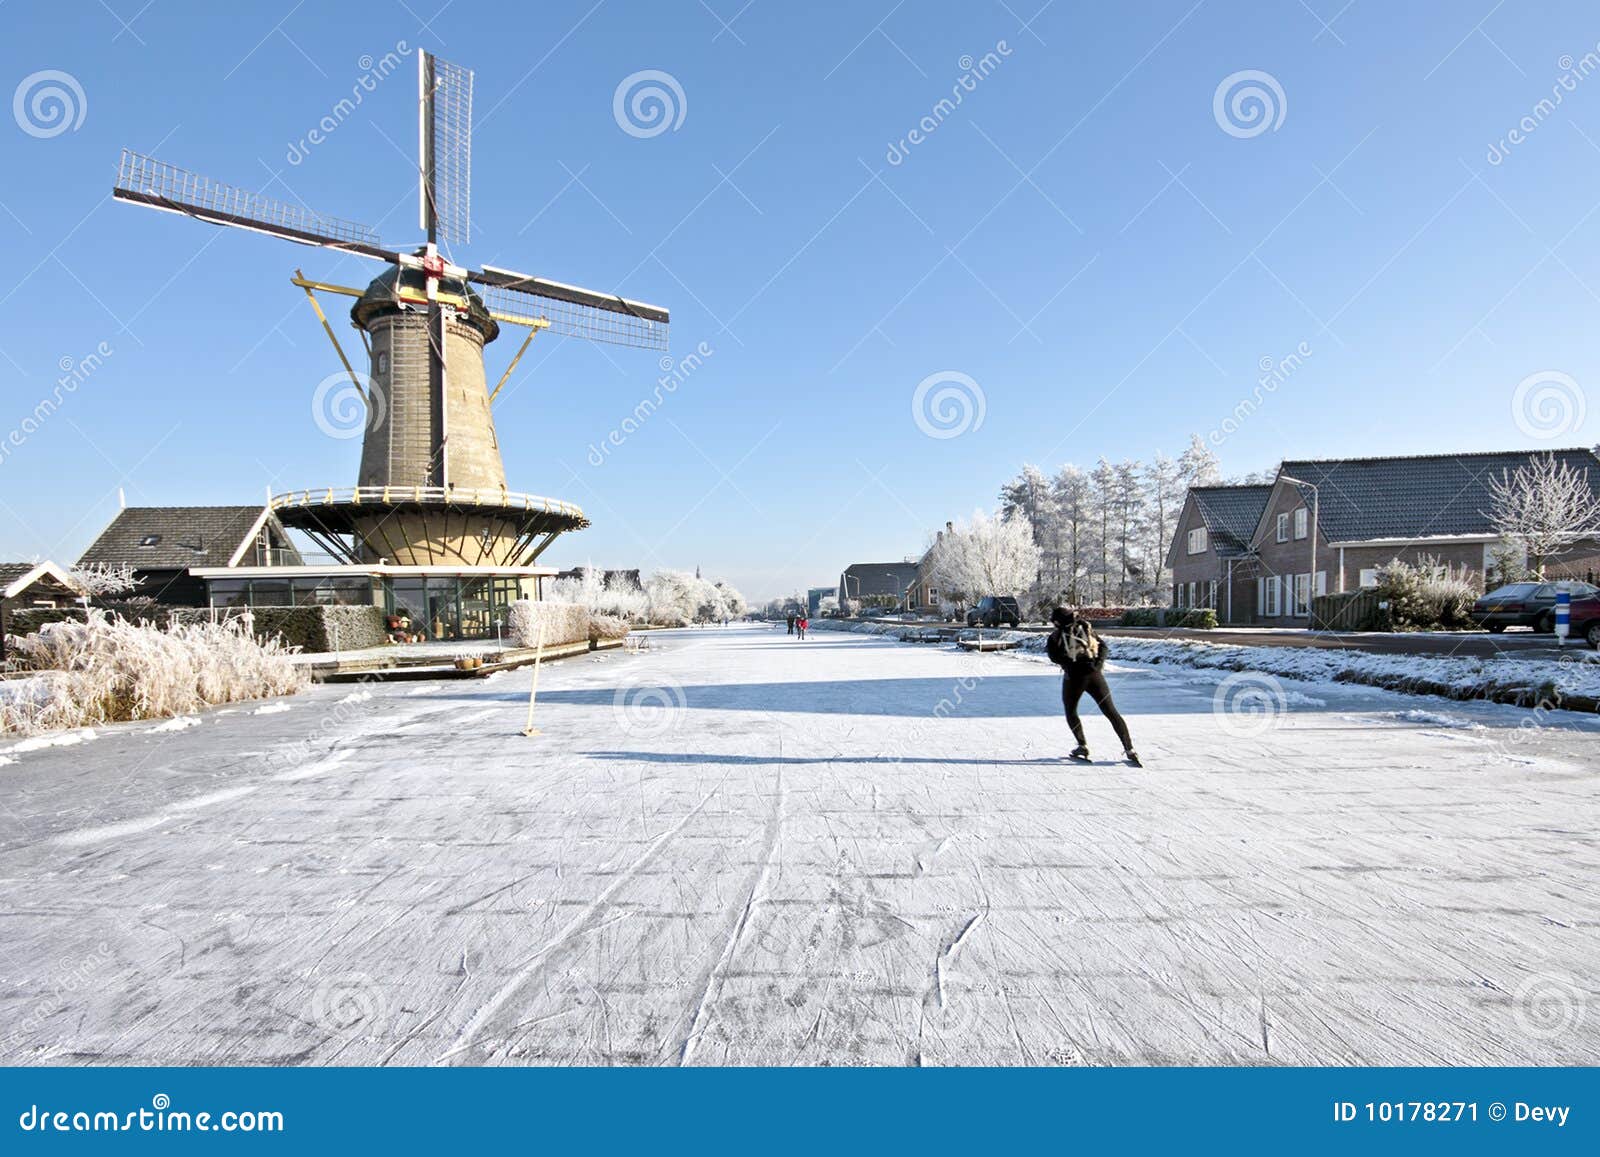 Ice Skating in the Countryside from Stock Image - Image of frozen, male